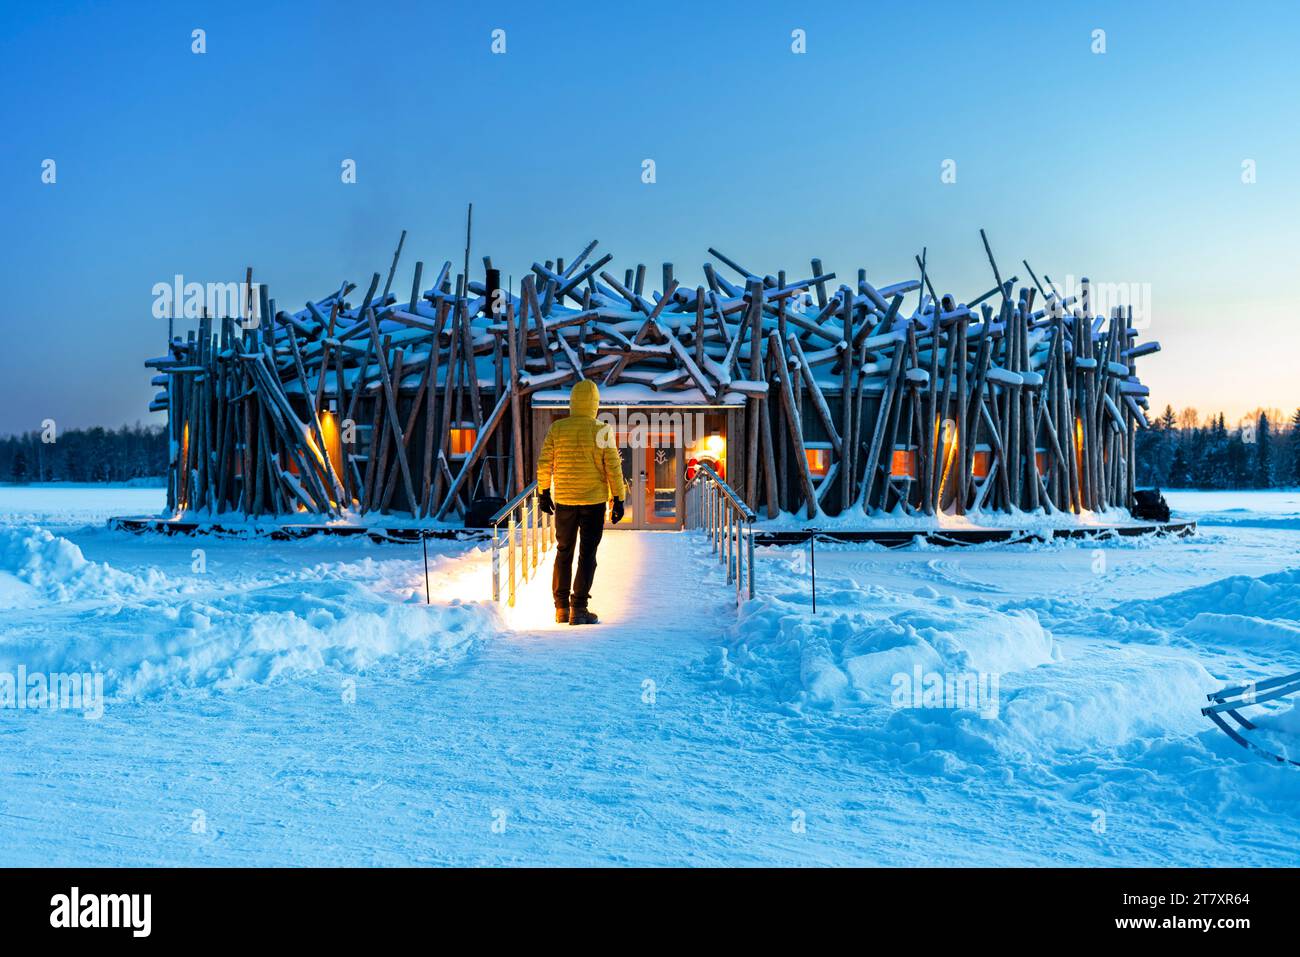 Person stands on the bridge connecting the main building of the illuminated Arctic Bath hotel made of logs, dusk time, Harads, Swedish Lapland Stock Photo